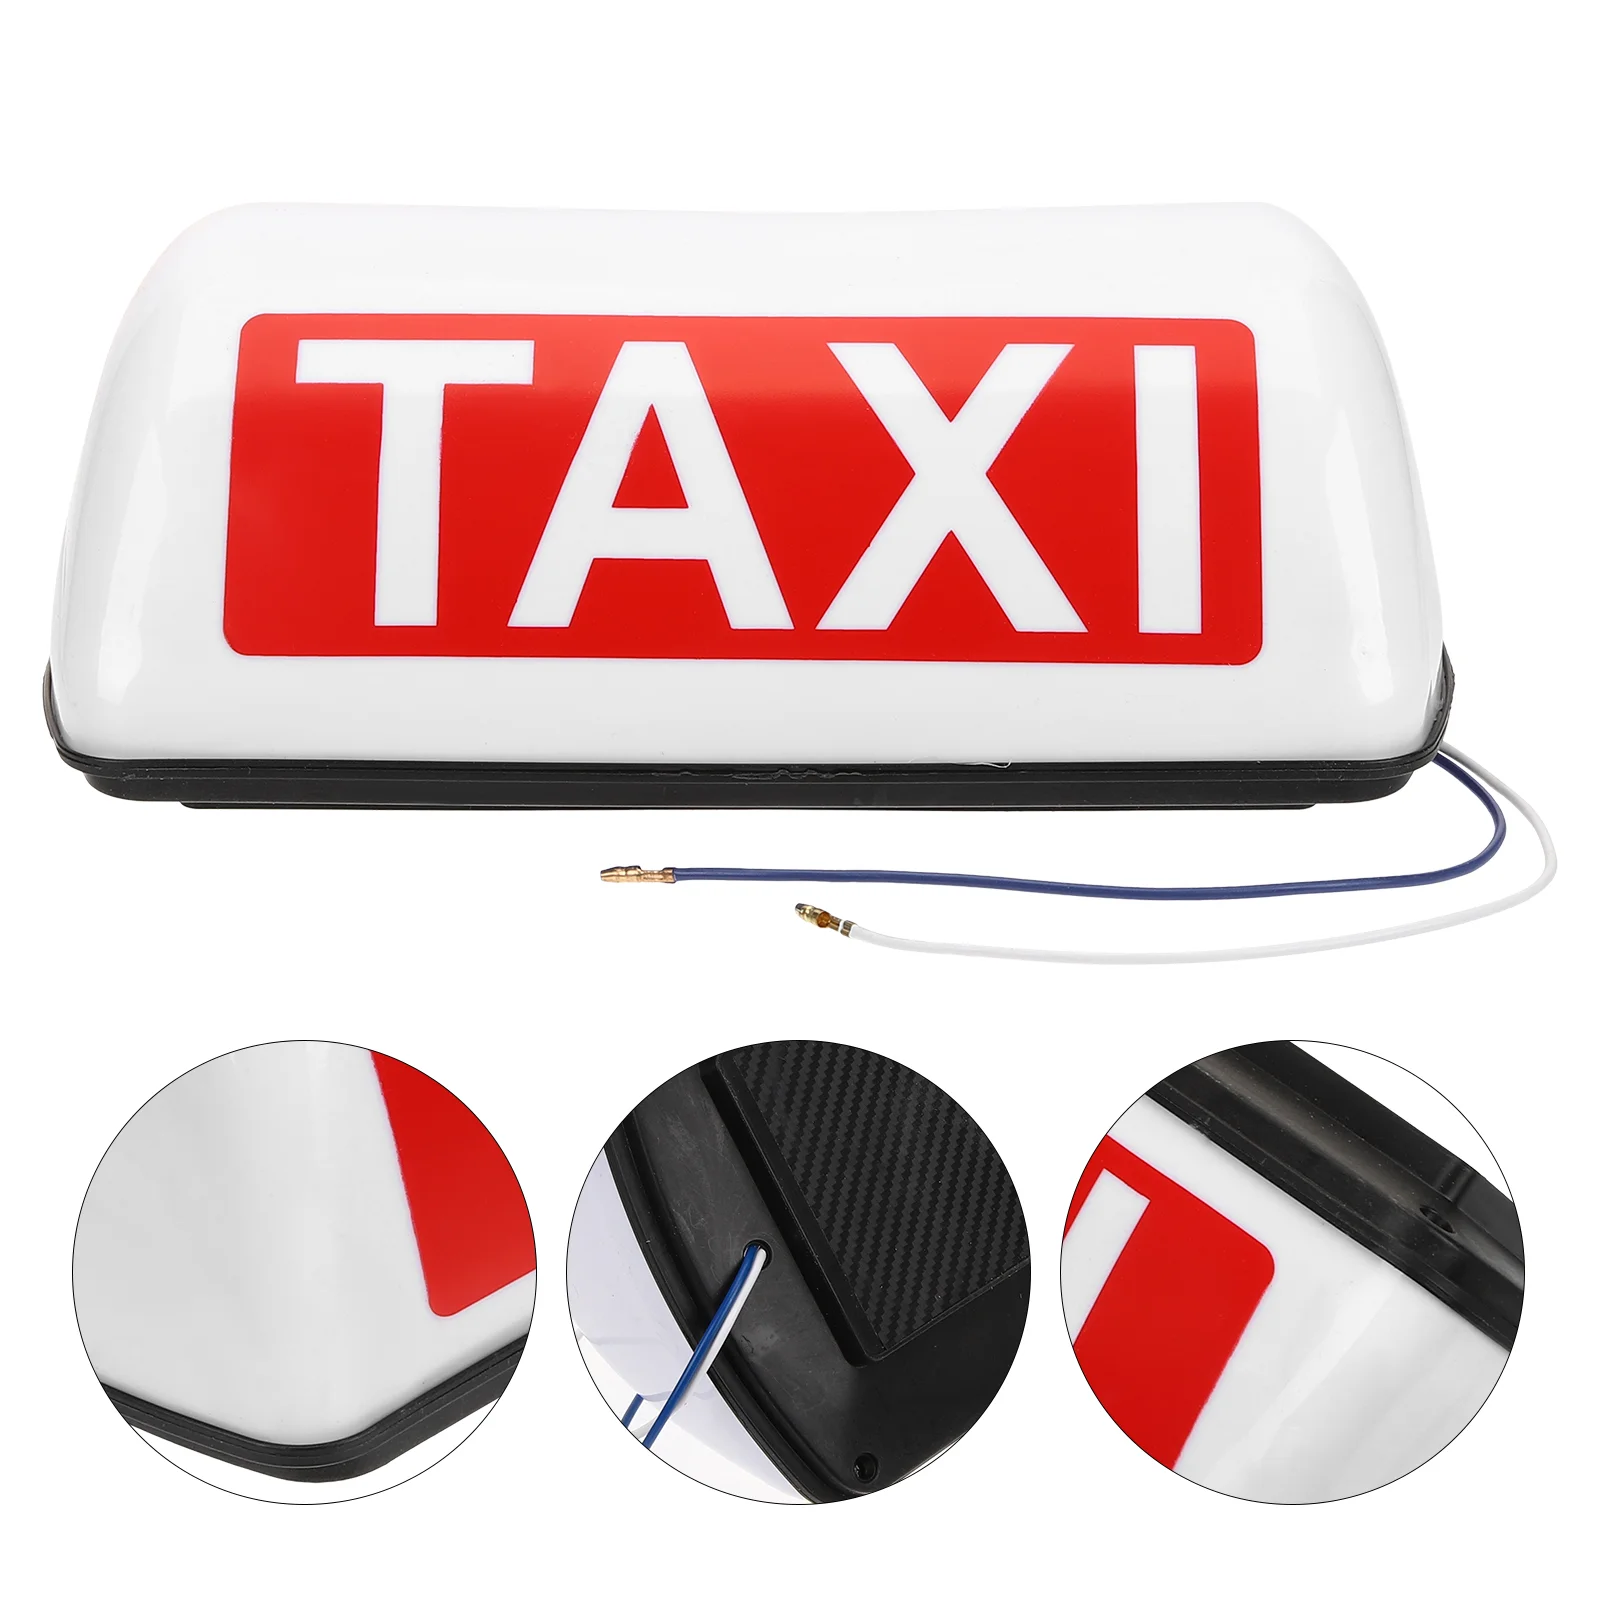 

Taxi Sign Led Light Roof Car Bright Up Lift Engine Ls Scrolling Lights Cab Plate